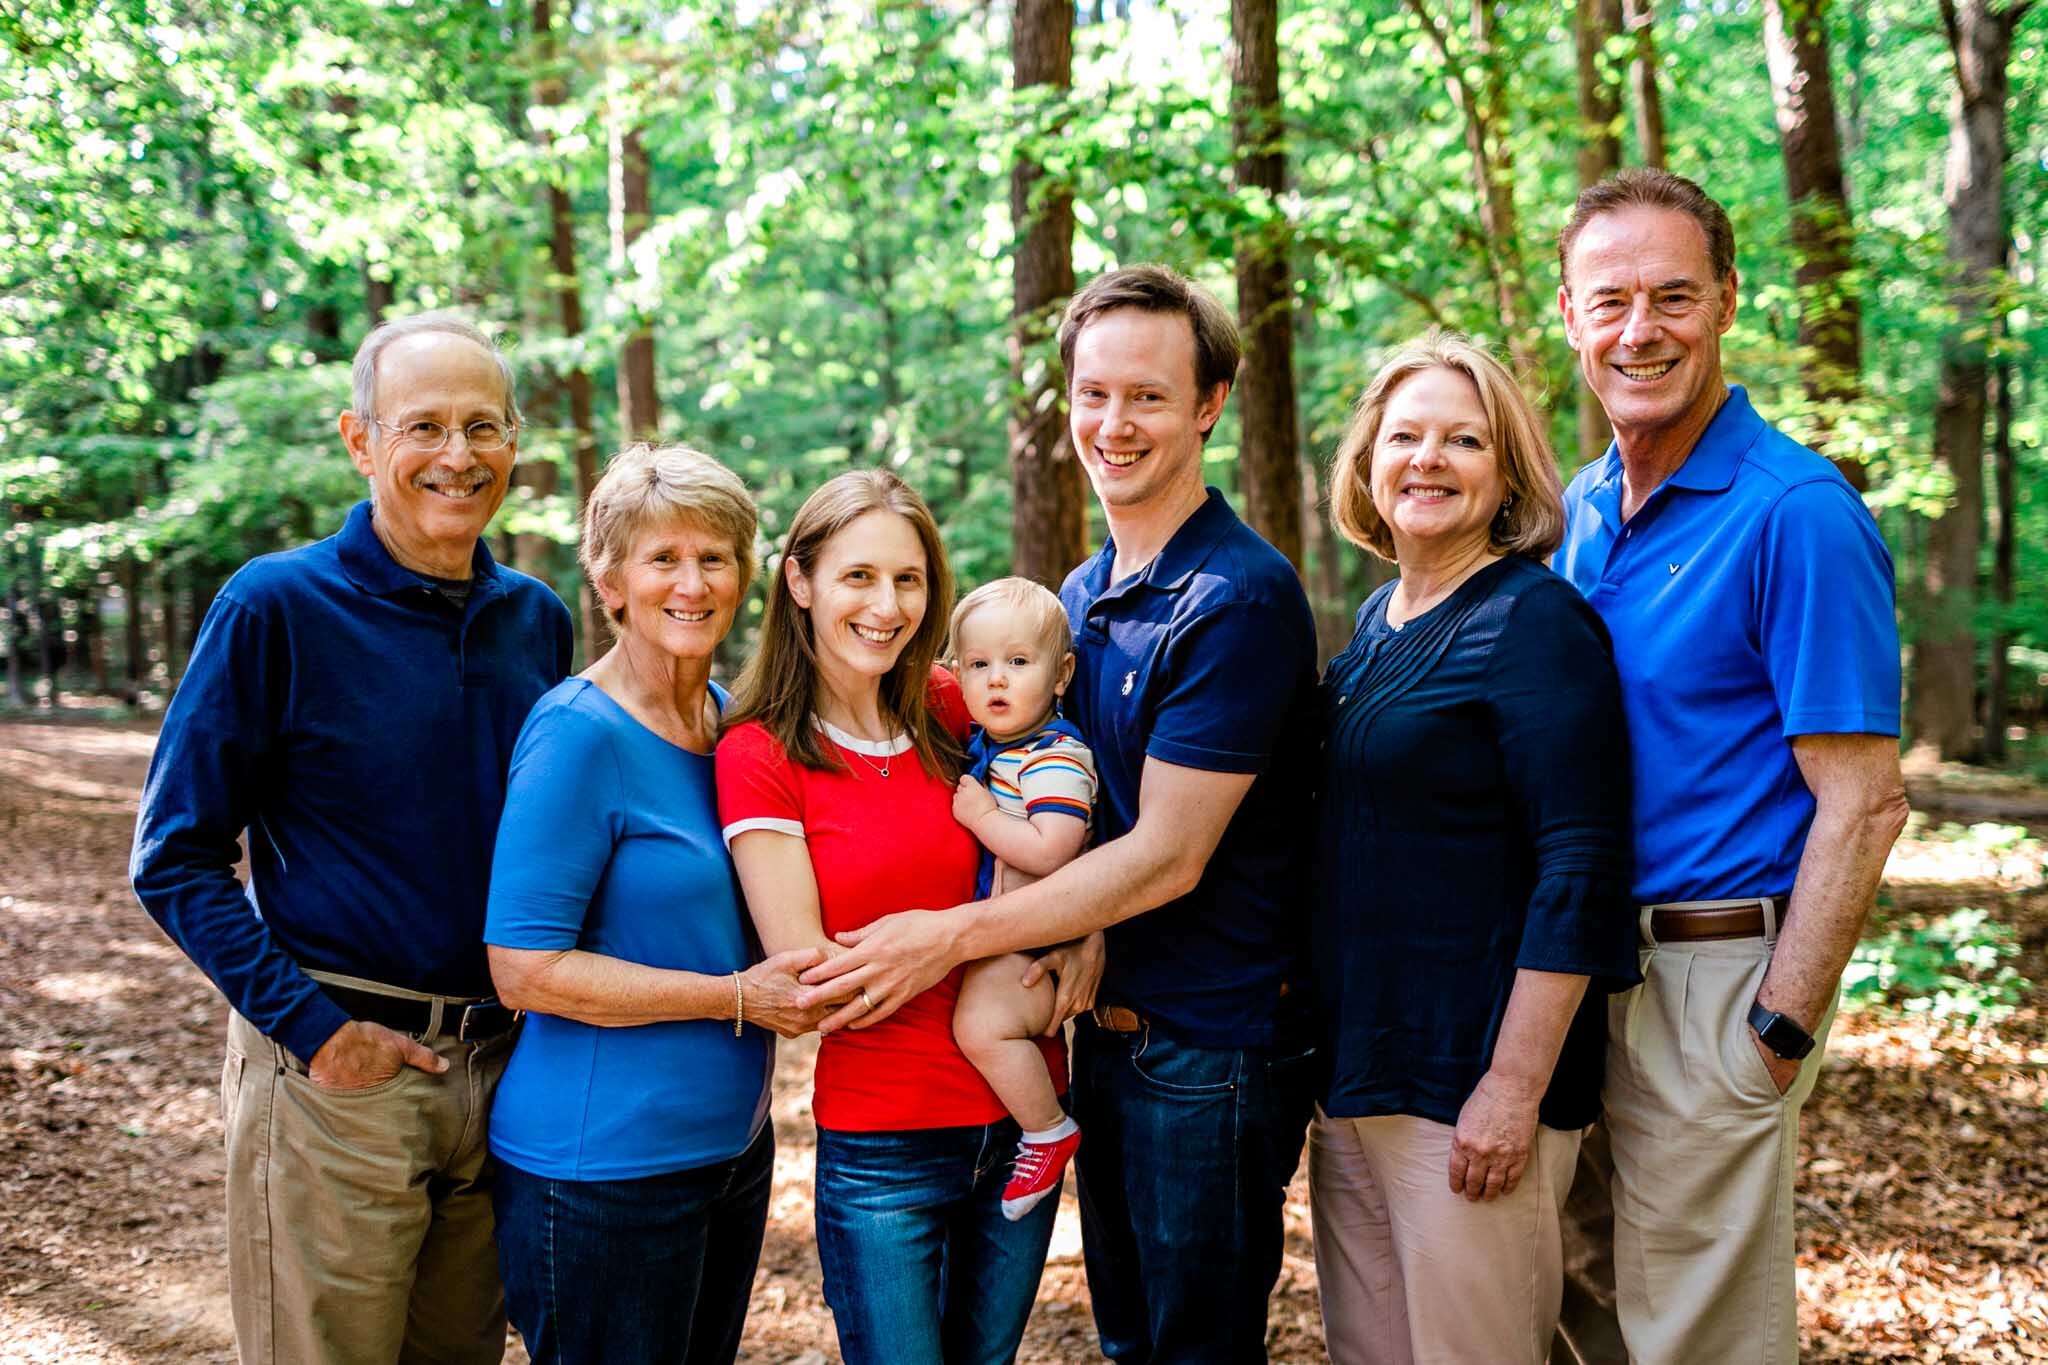 Raleigh Family Photographer | Umstead Park | By G. Lin Photography | Spring family photo outdoors